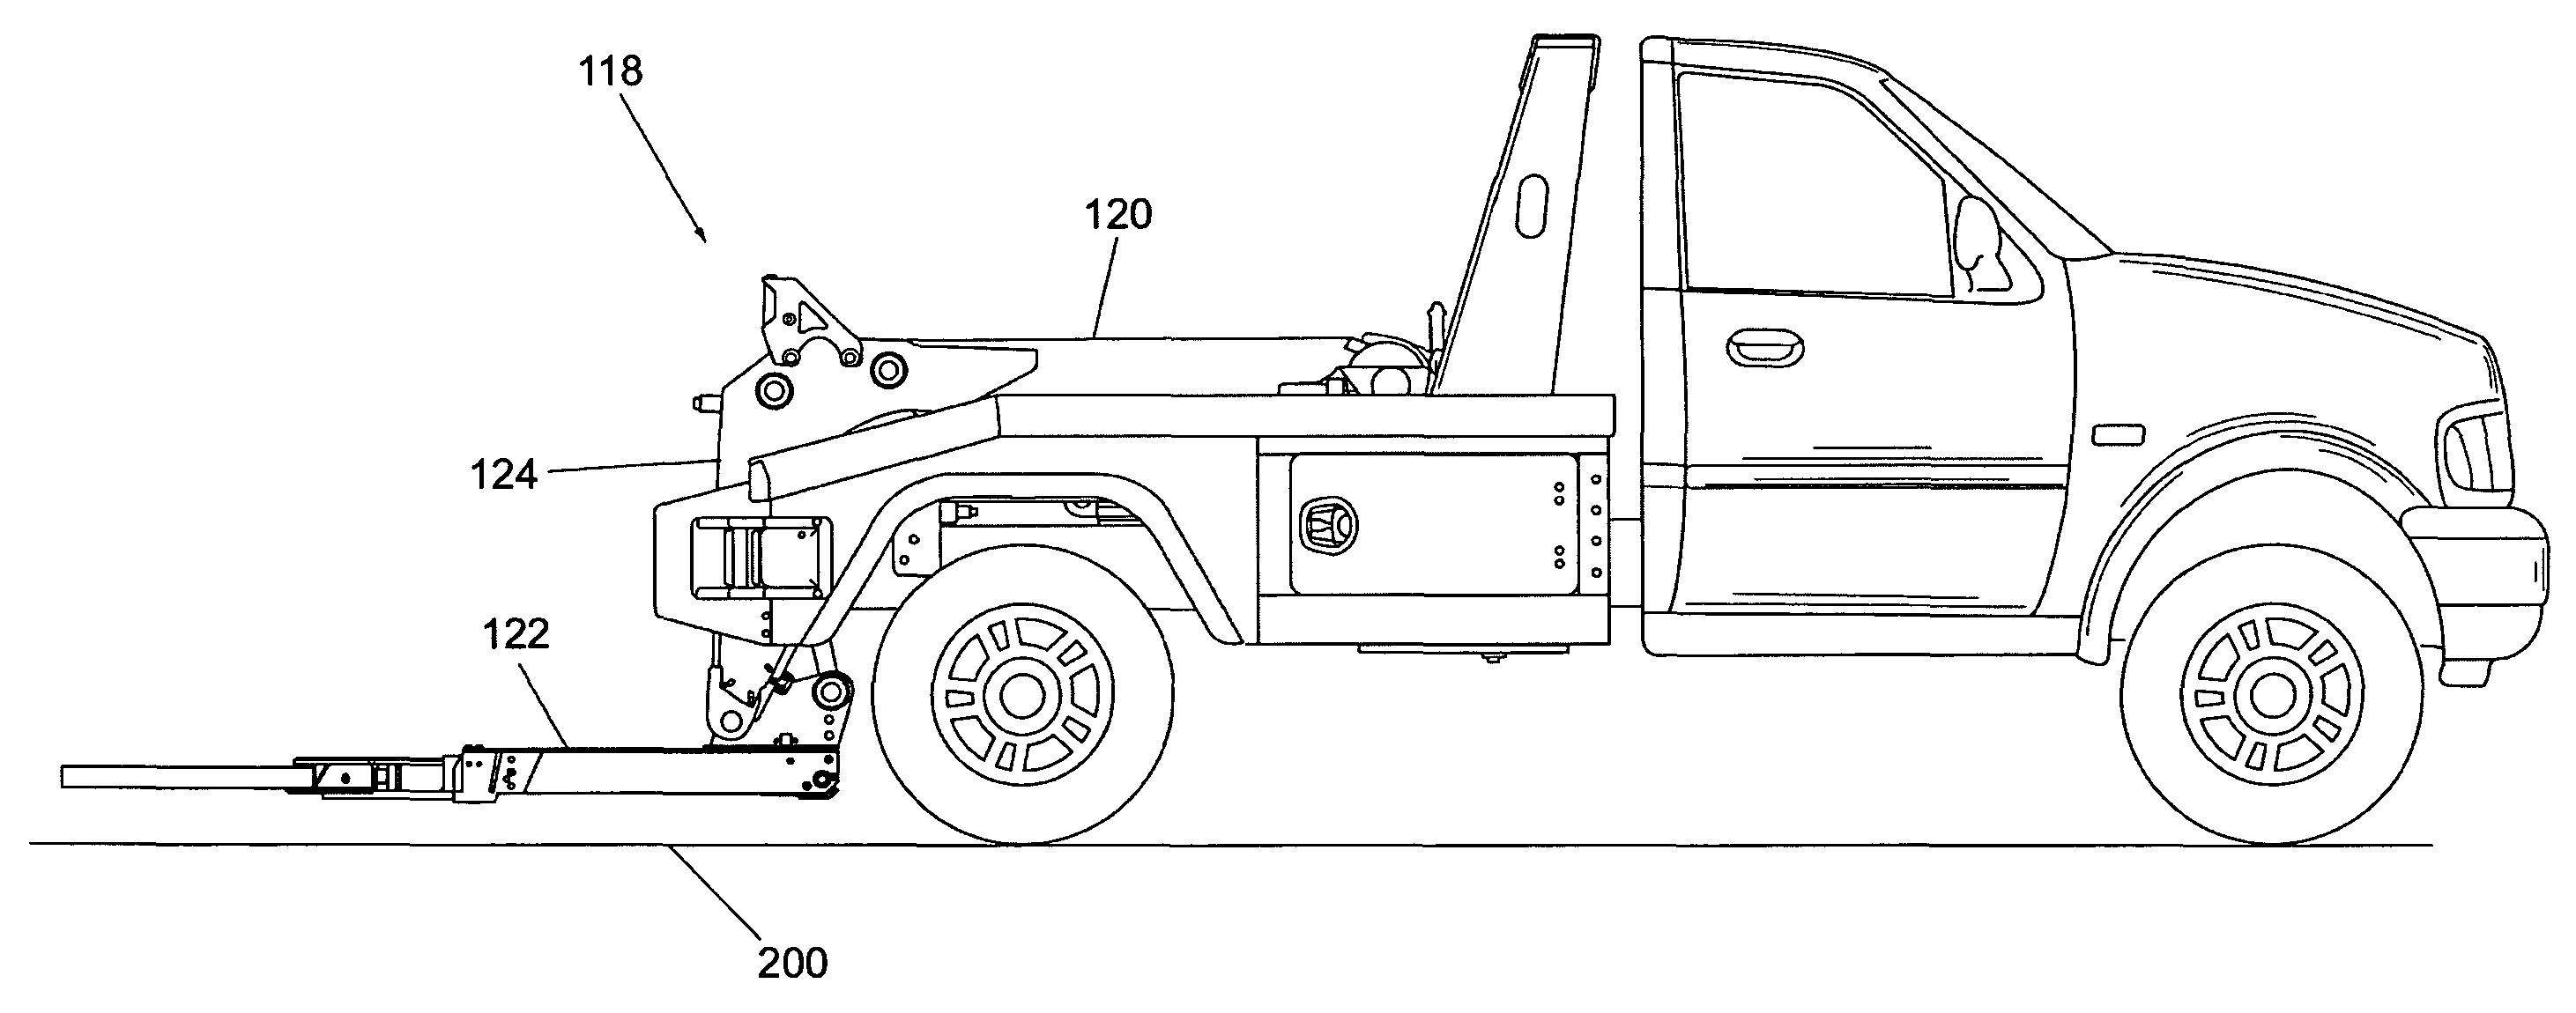 Tow truck with underlift control